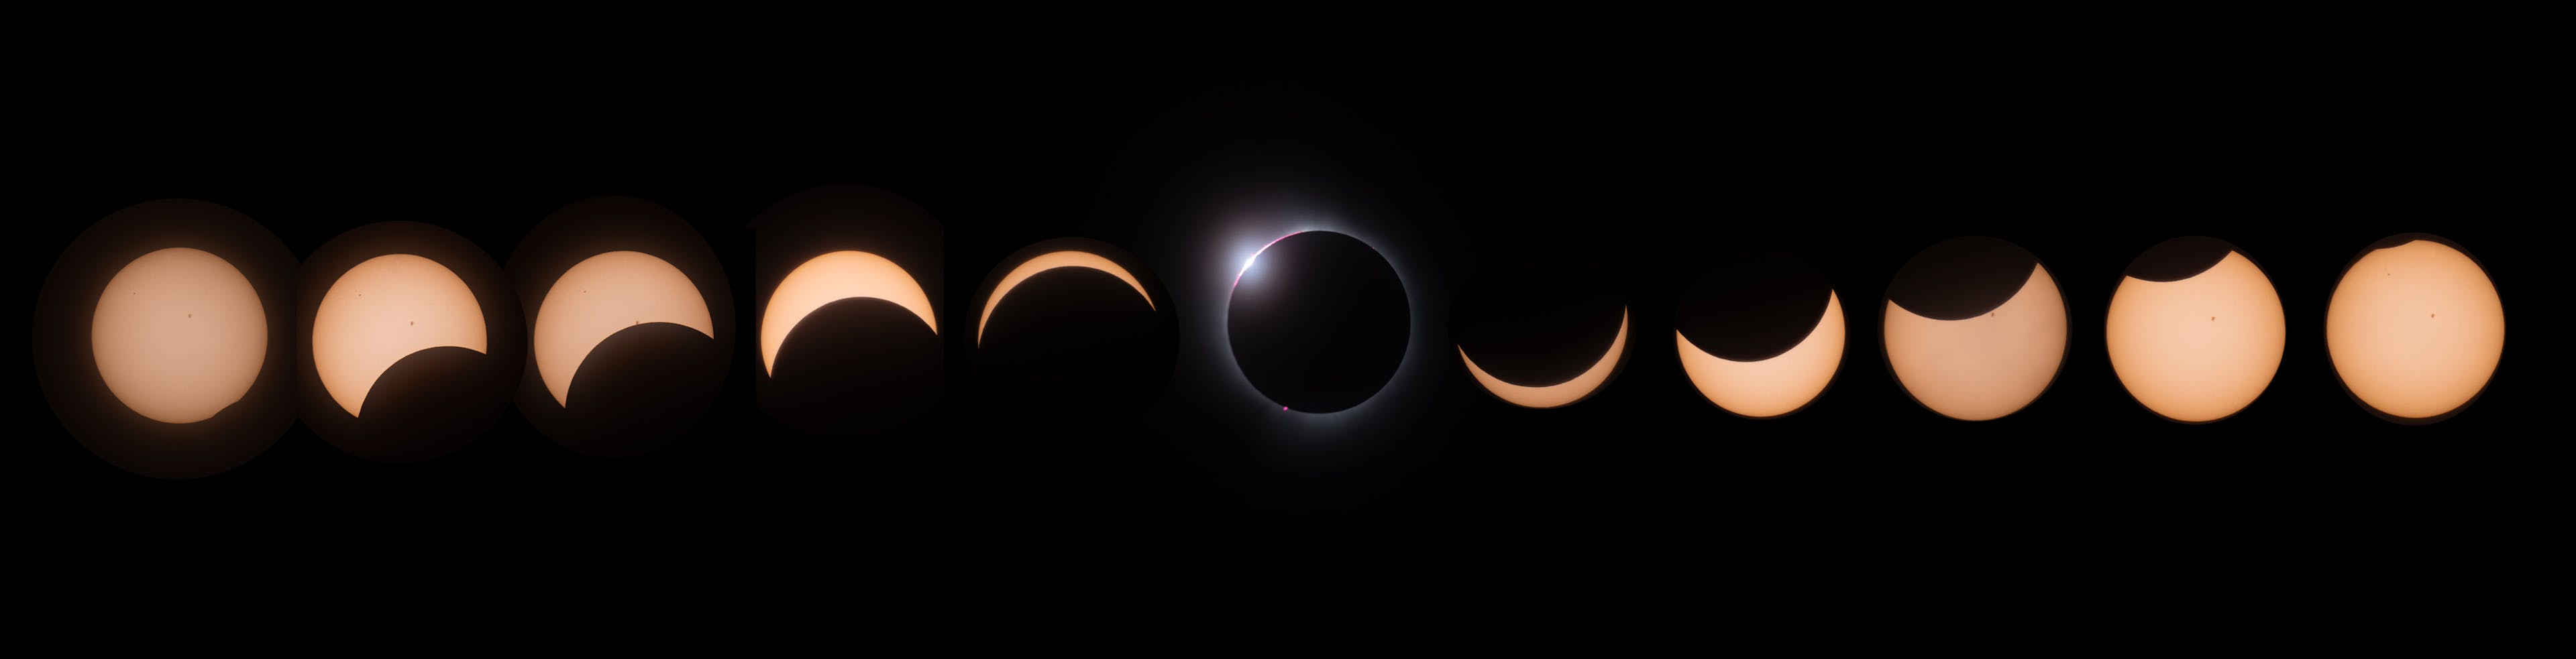 Partial and total phases of the solar eclipse of April 8, 2024, as seen from Burlington, Vermont, USA. The images were shot through 92mm Astro-Physics Stowaway refractor with Nikon D810a. Baader Planetarium safe solar filter used for the partial eclipse. Credit: Sævar Helgi Bragason